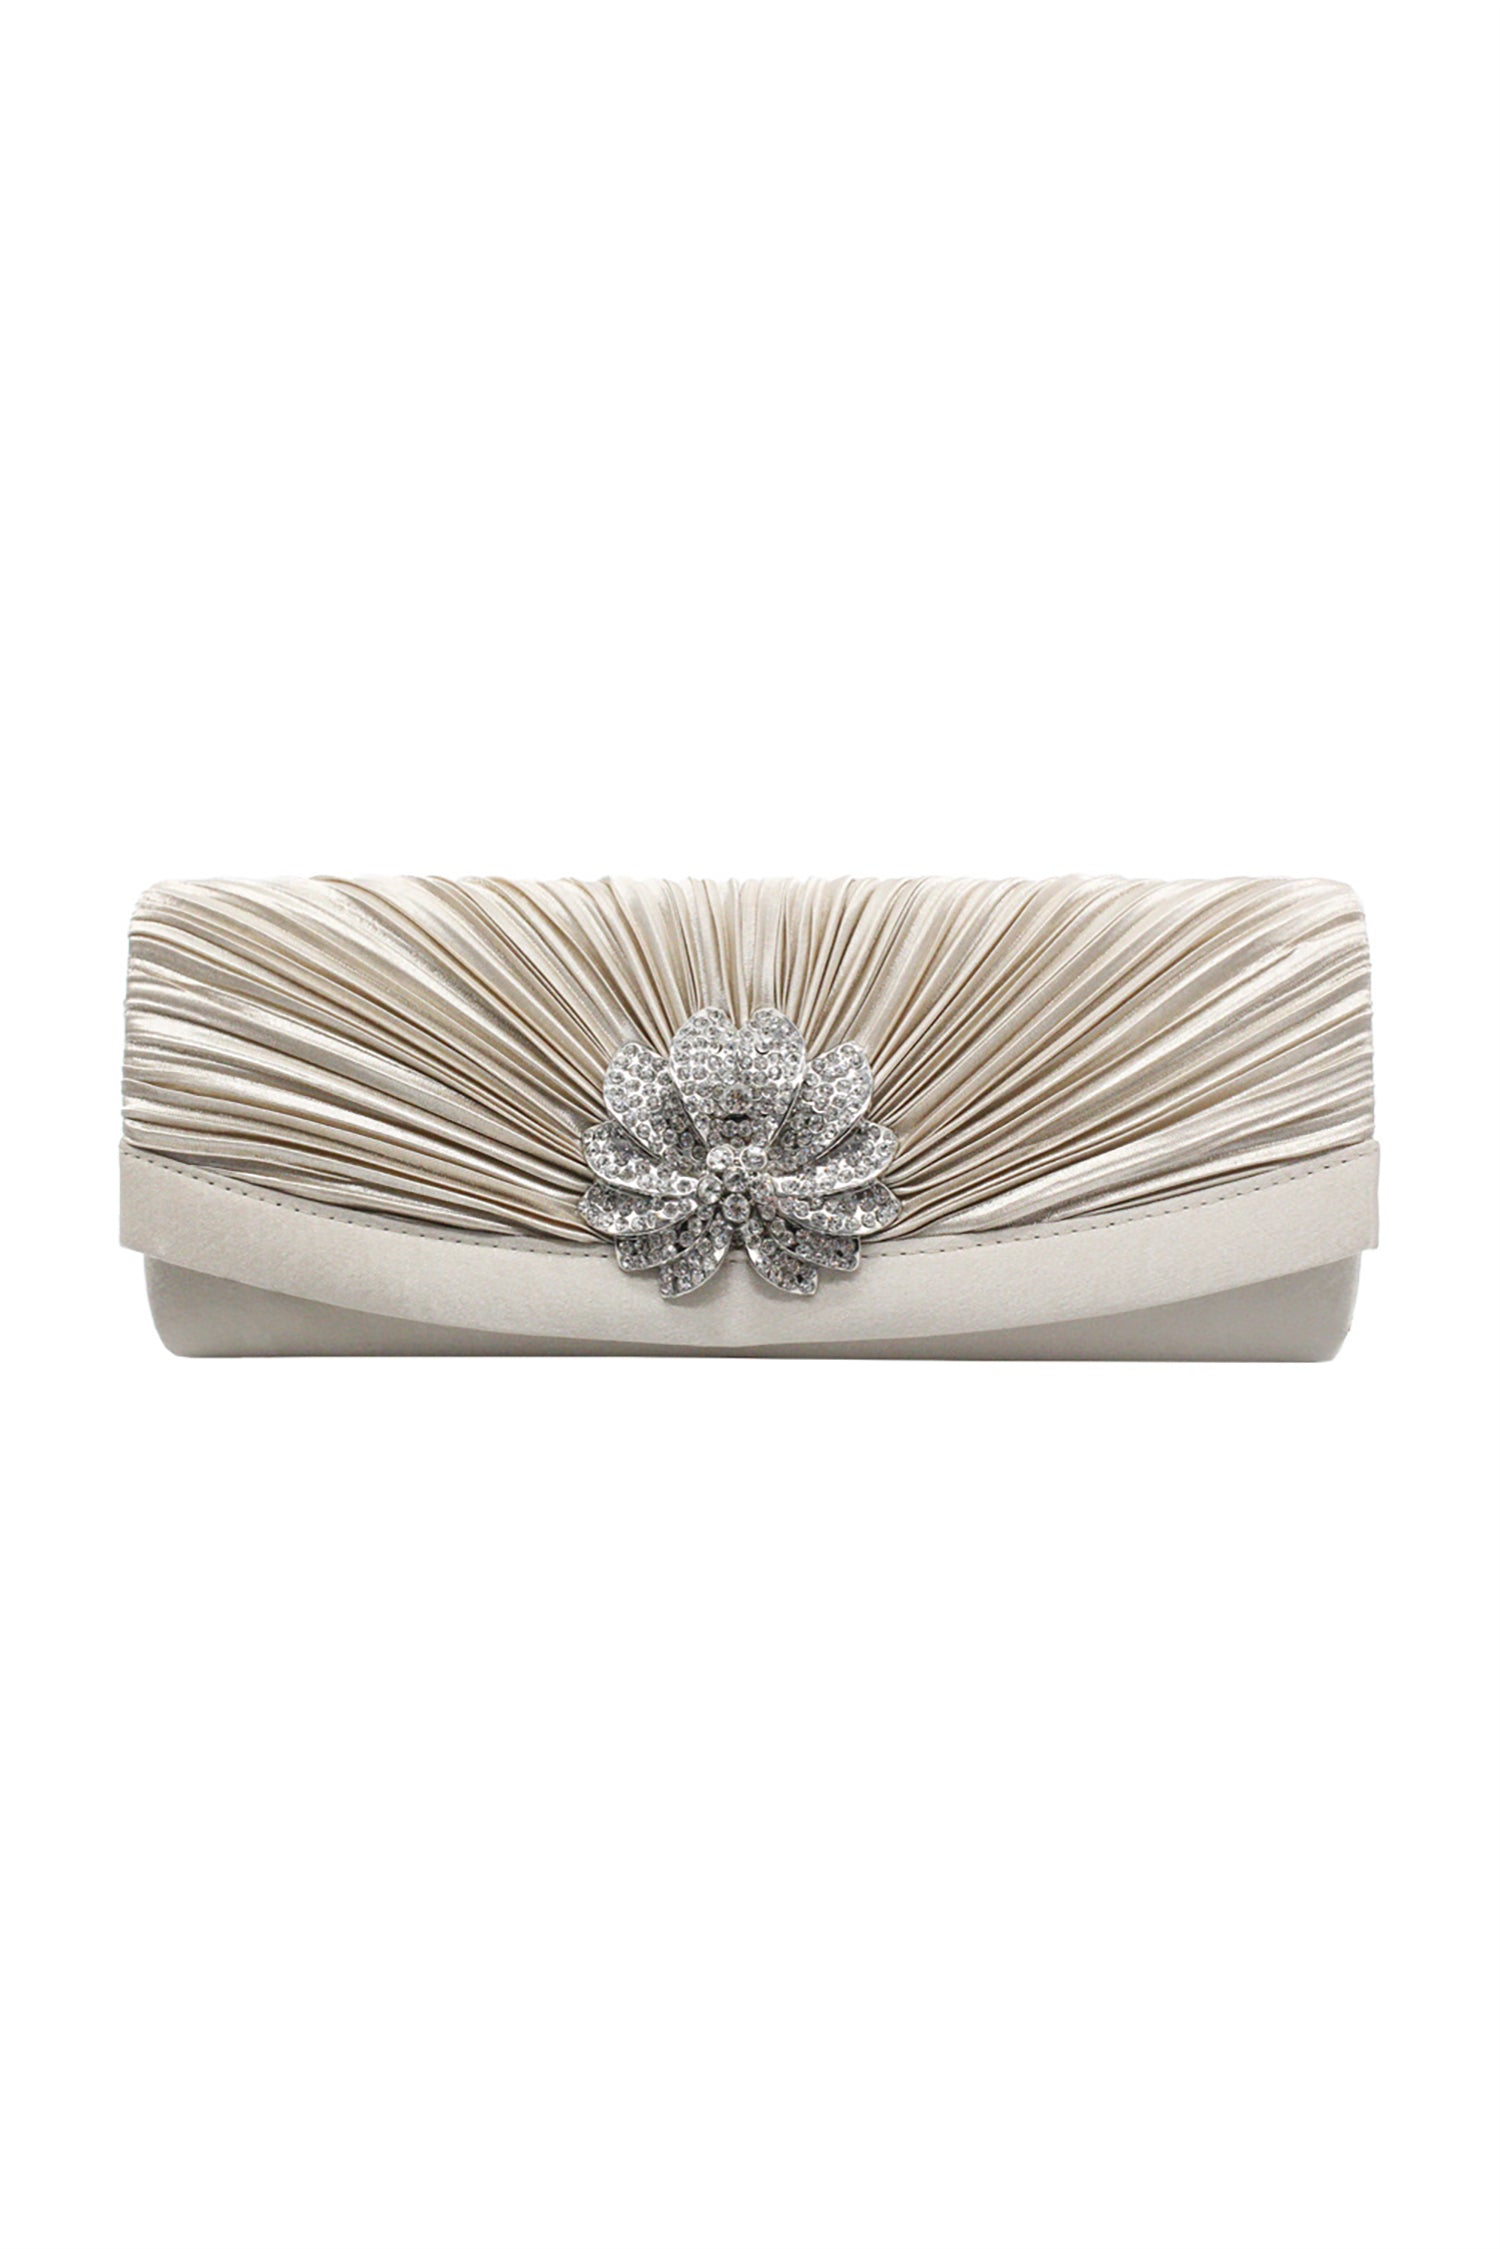 Rereny Pleated Diamante Buckle Clutch